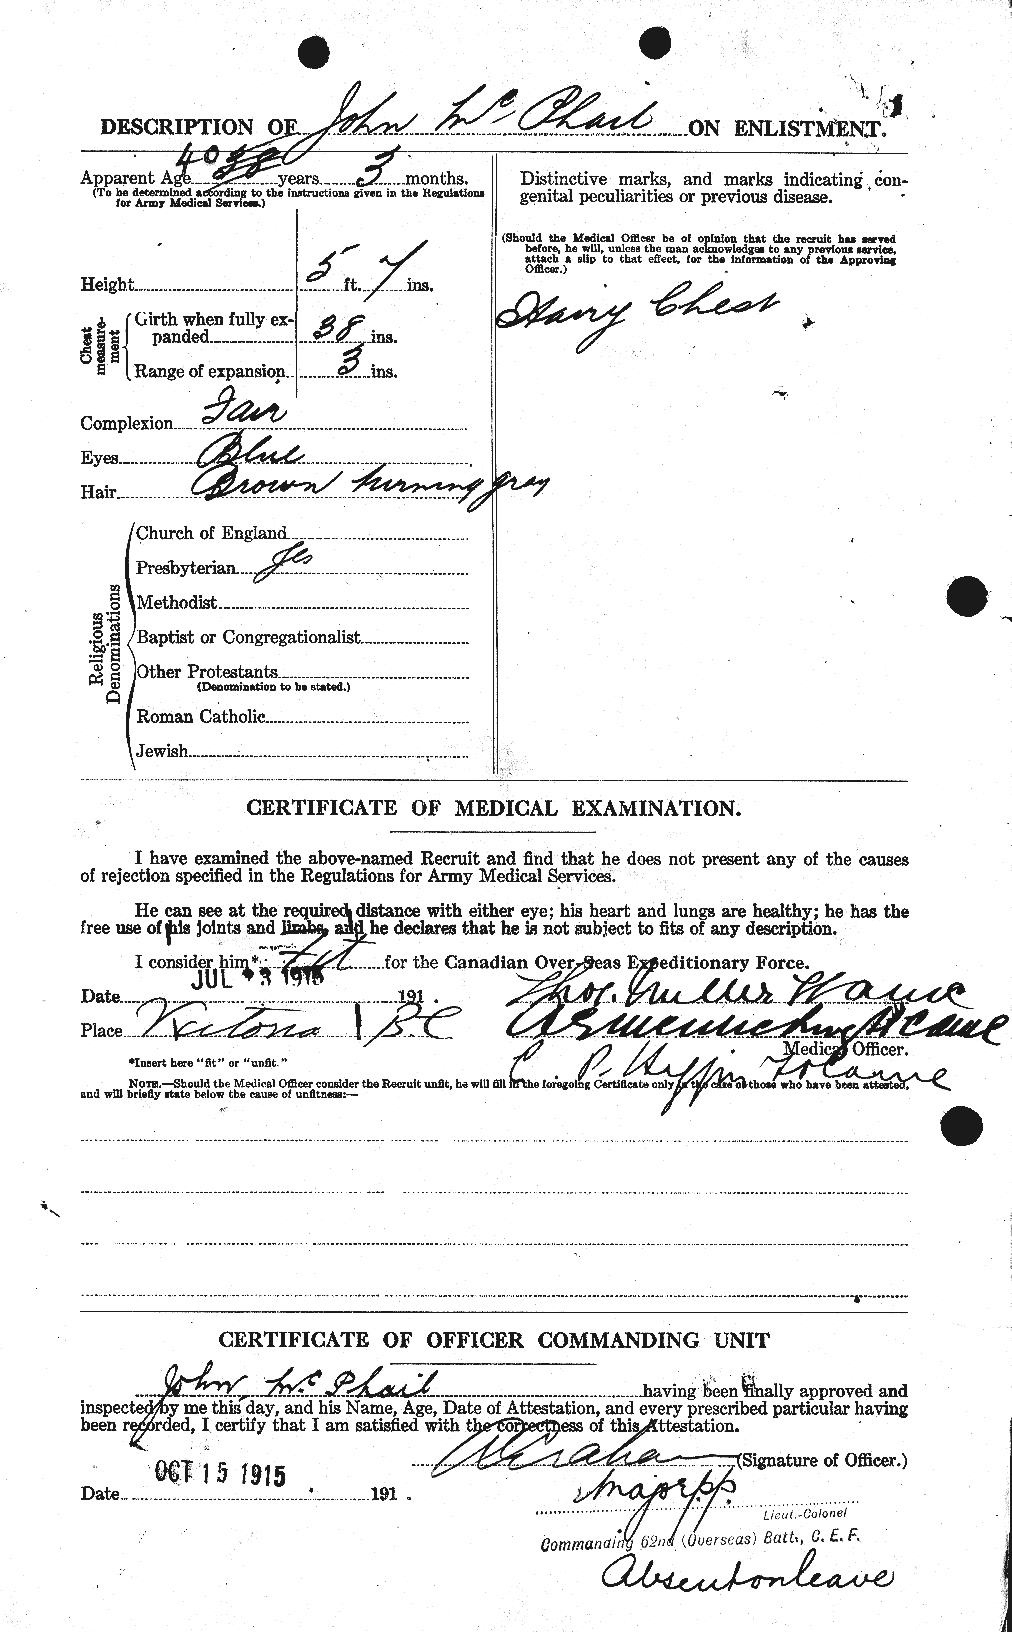 Personnel Records of the First World War - CEF 540868b